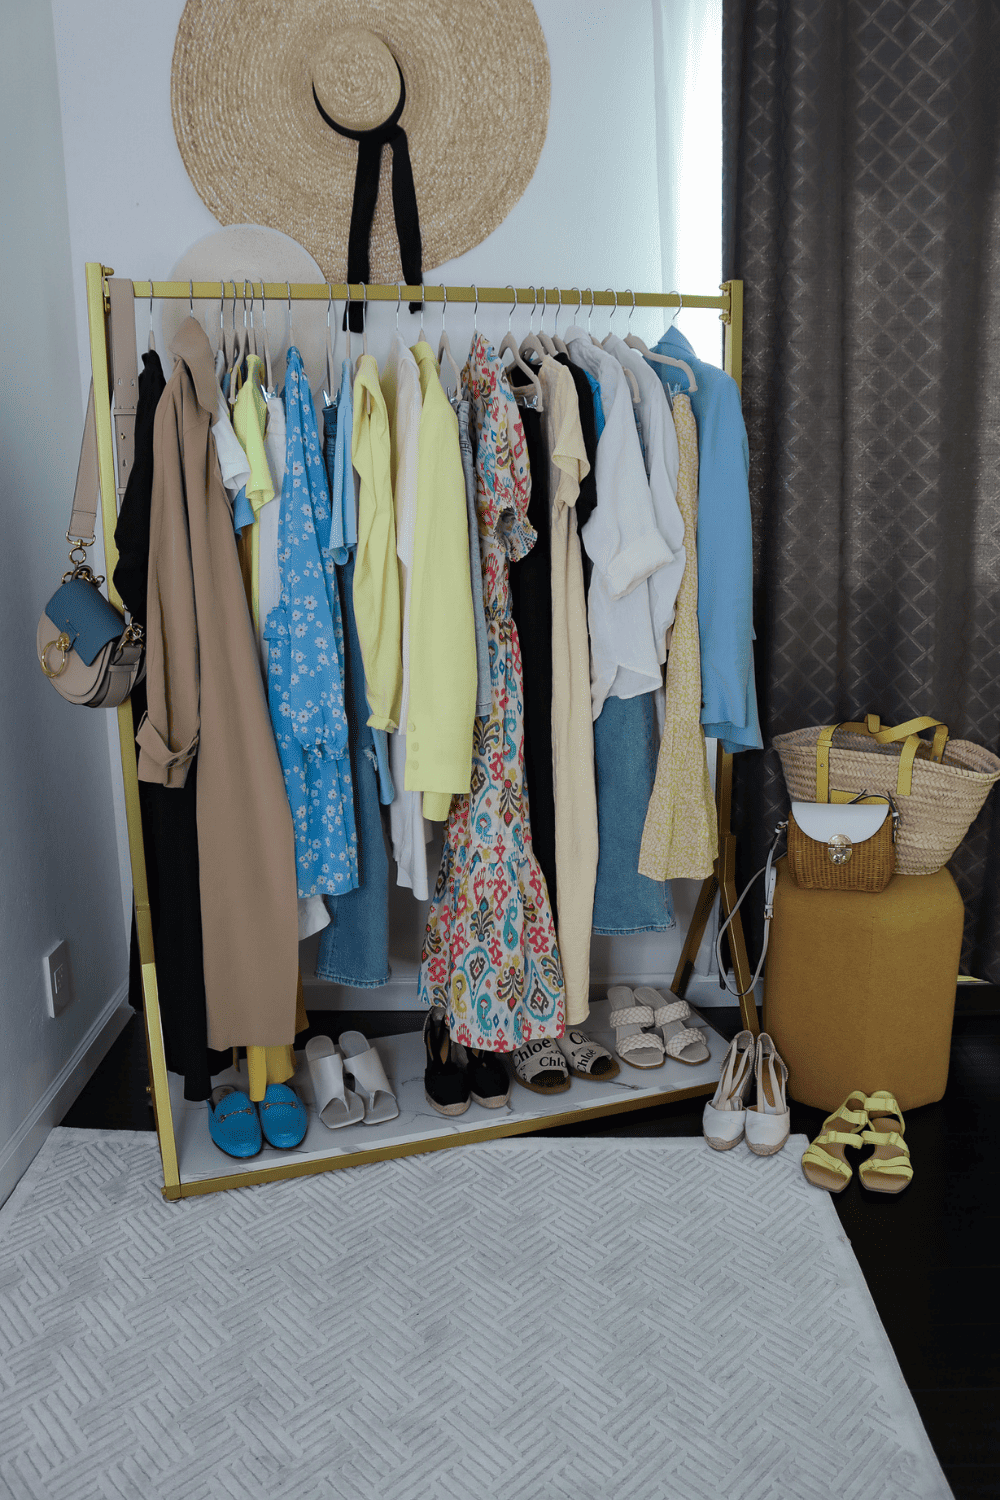 Step By Step Guide to Building a Colorful Capsule Wardrobe - How I Did It